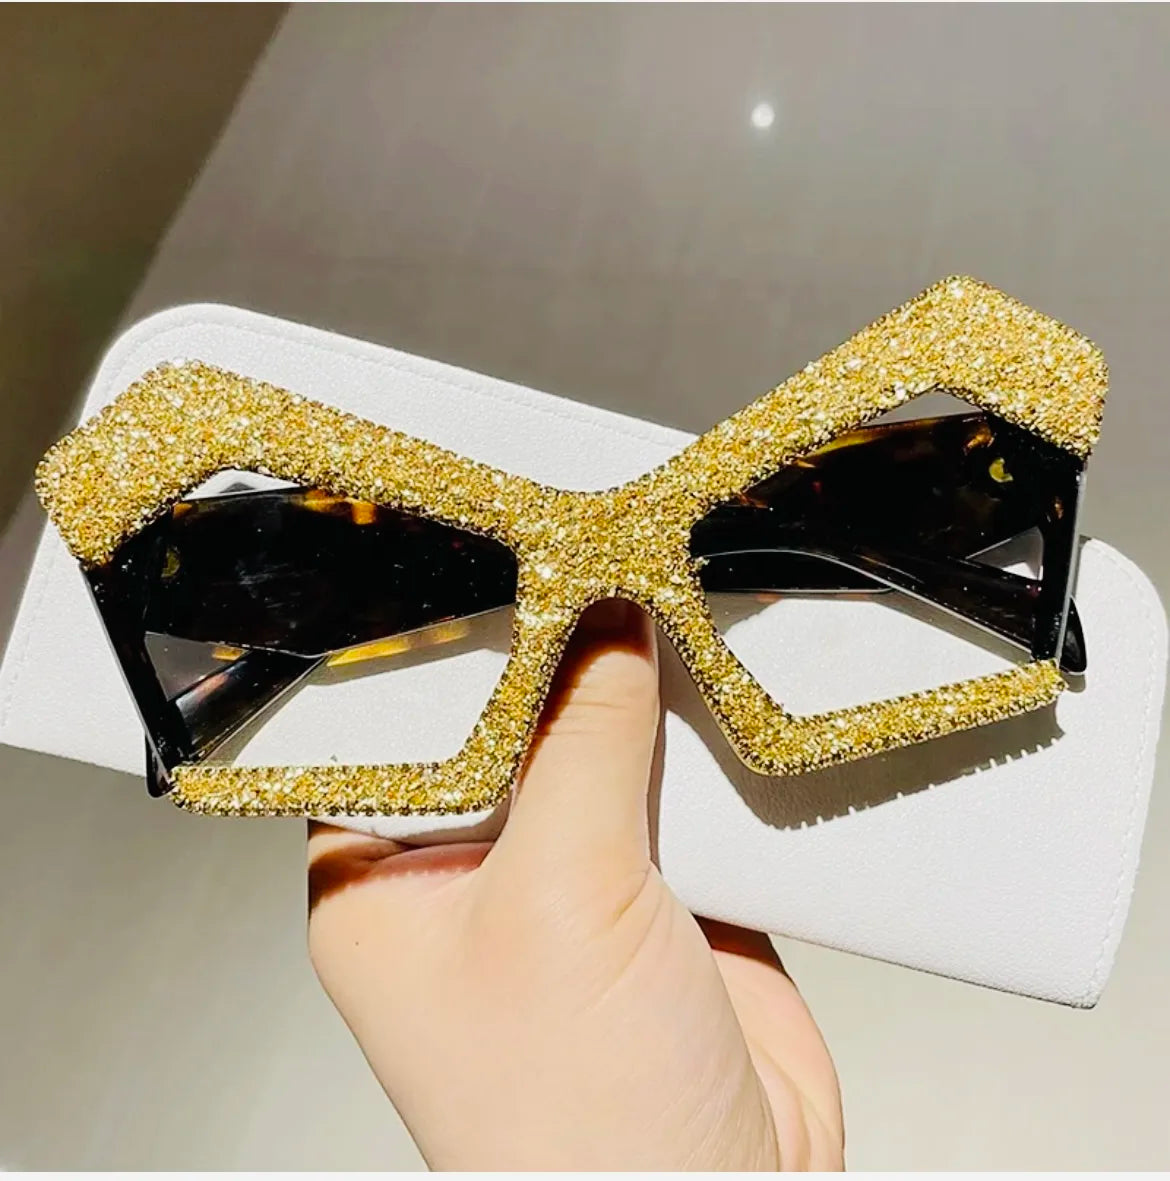 2023 Unique Irregular Personality Over Sized Eye Glasses Luxury Brand Candy Color Woman Sunglasses Decorative Fashion Shades